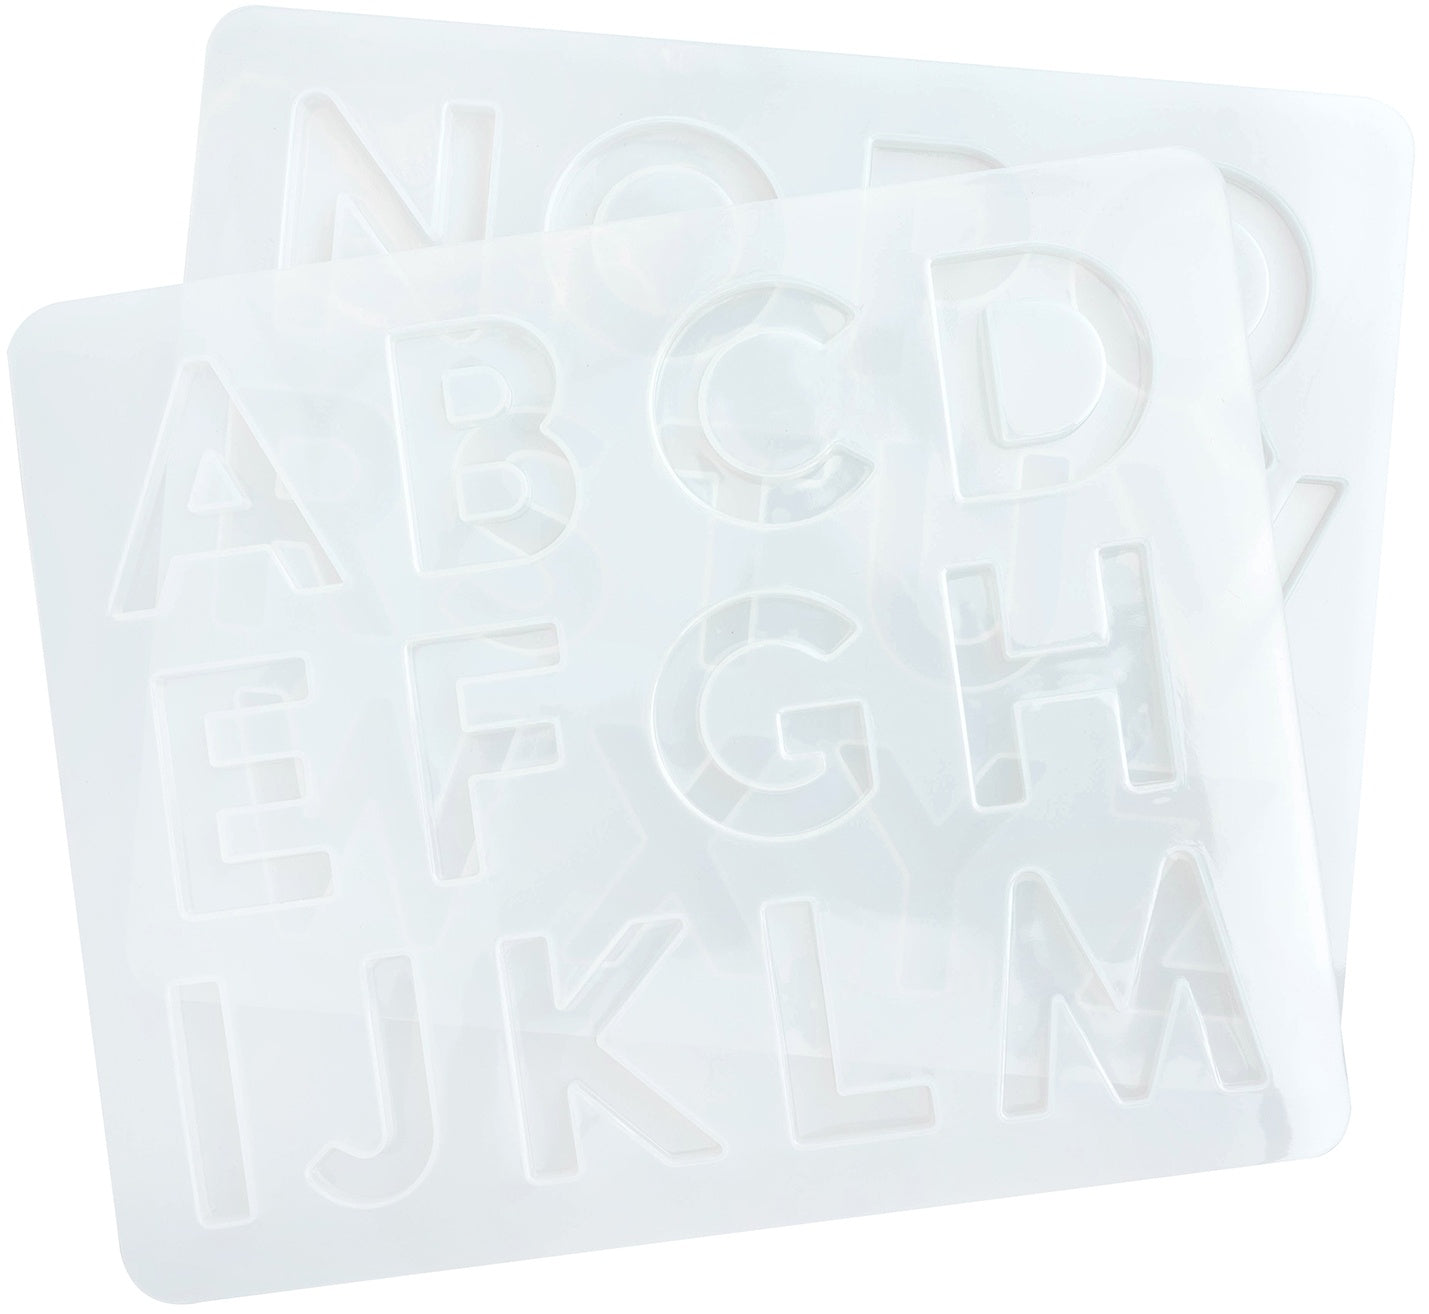 American Crafts™ Color Pour Resin Alphabet Mold